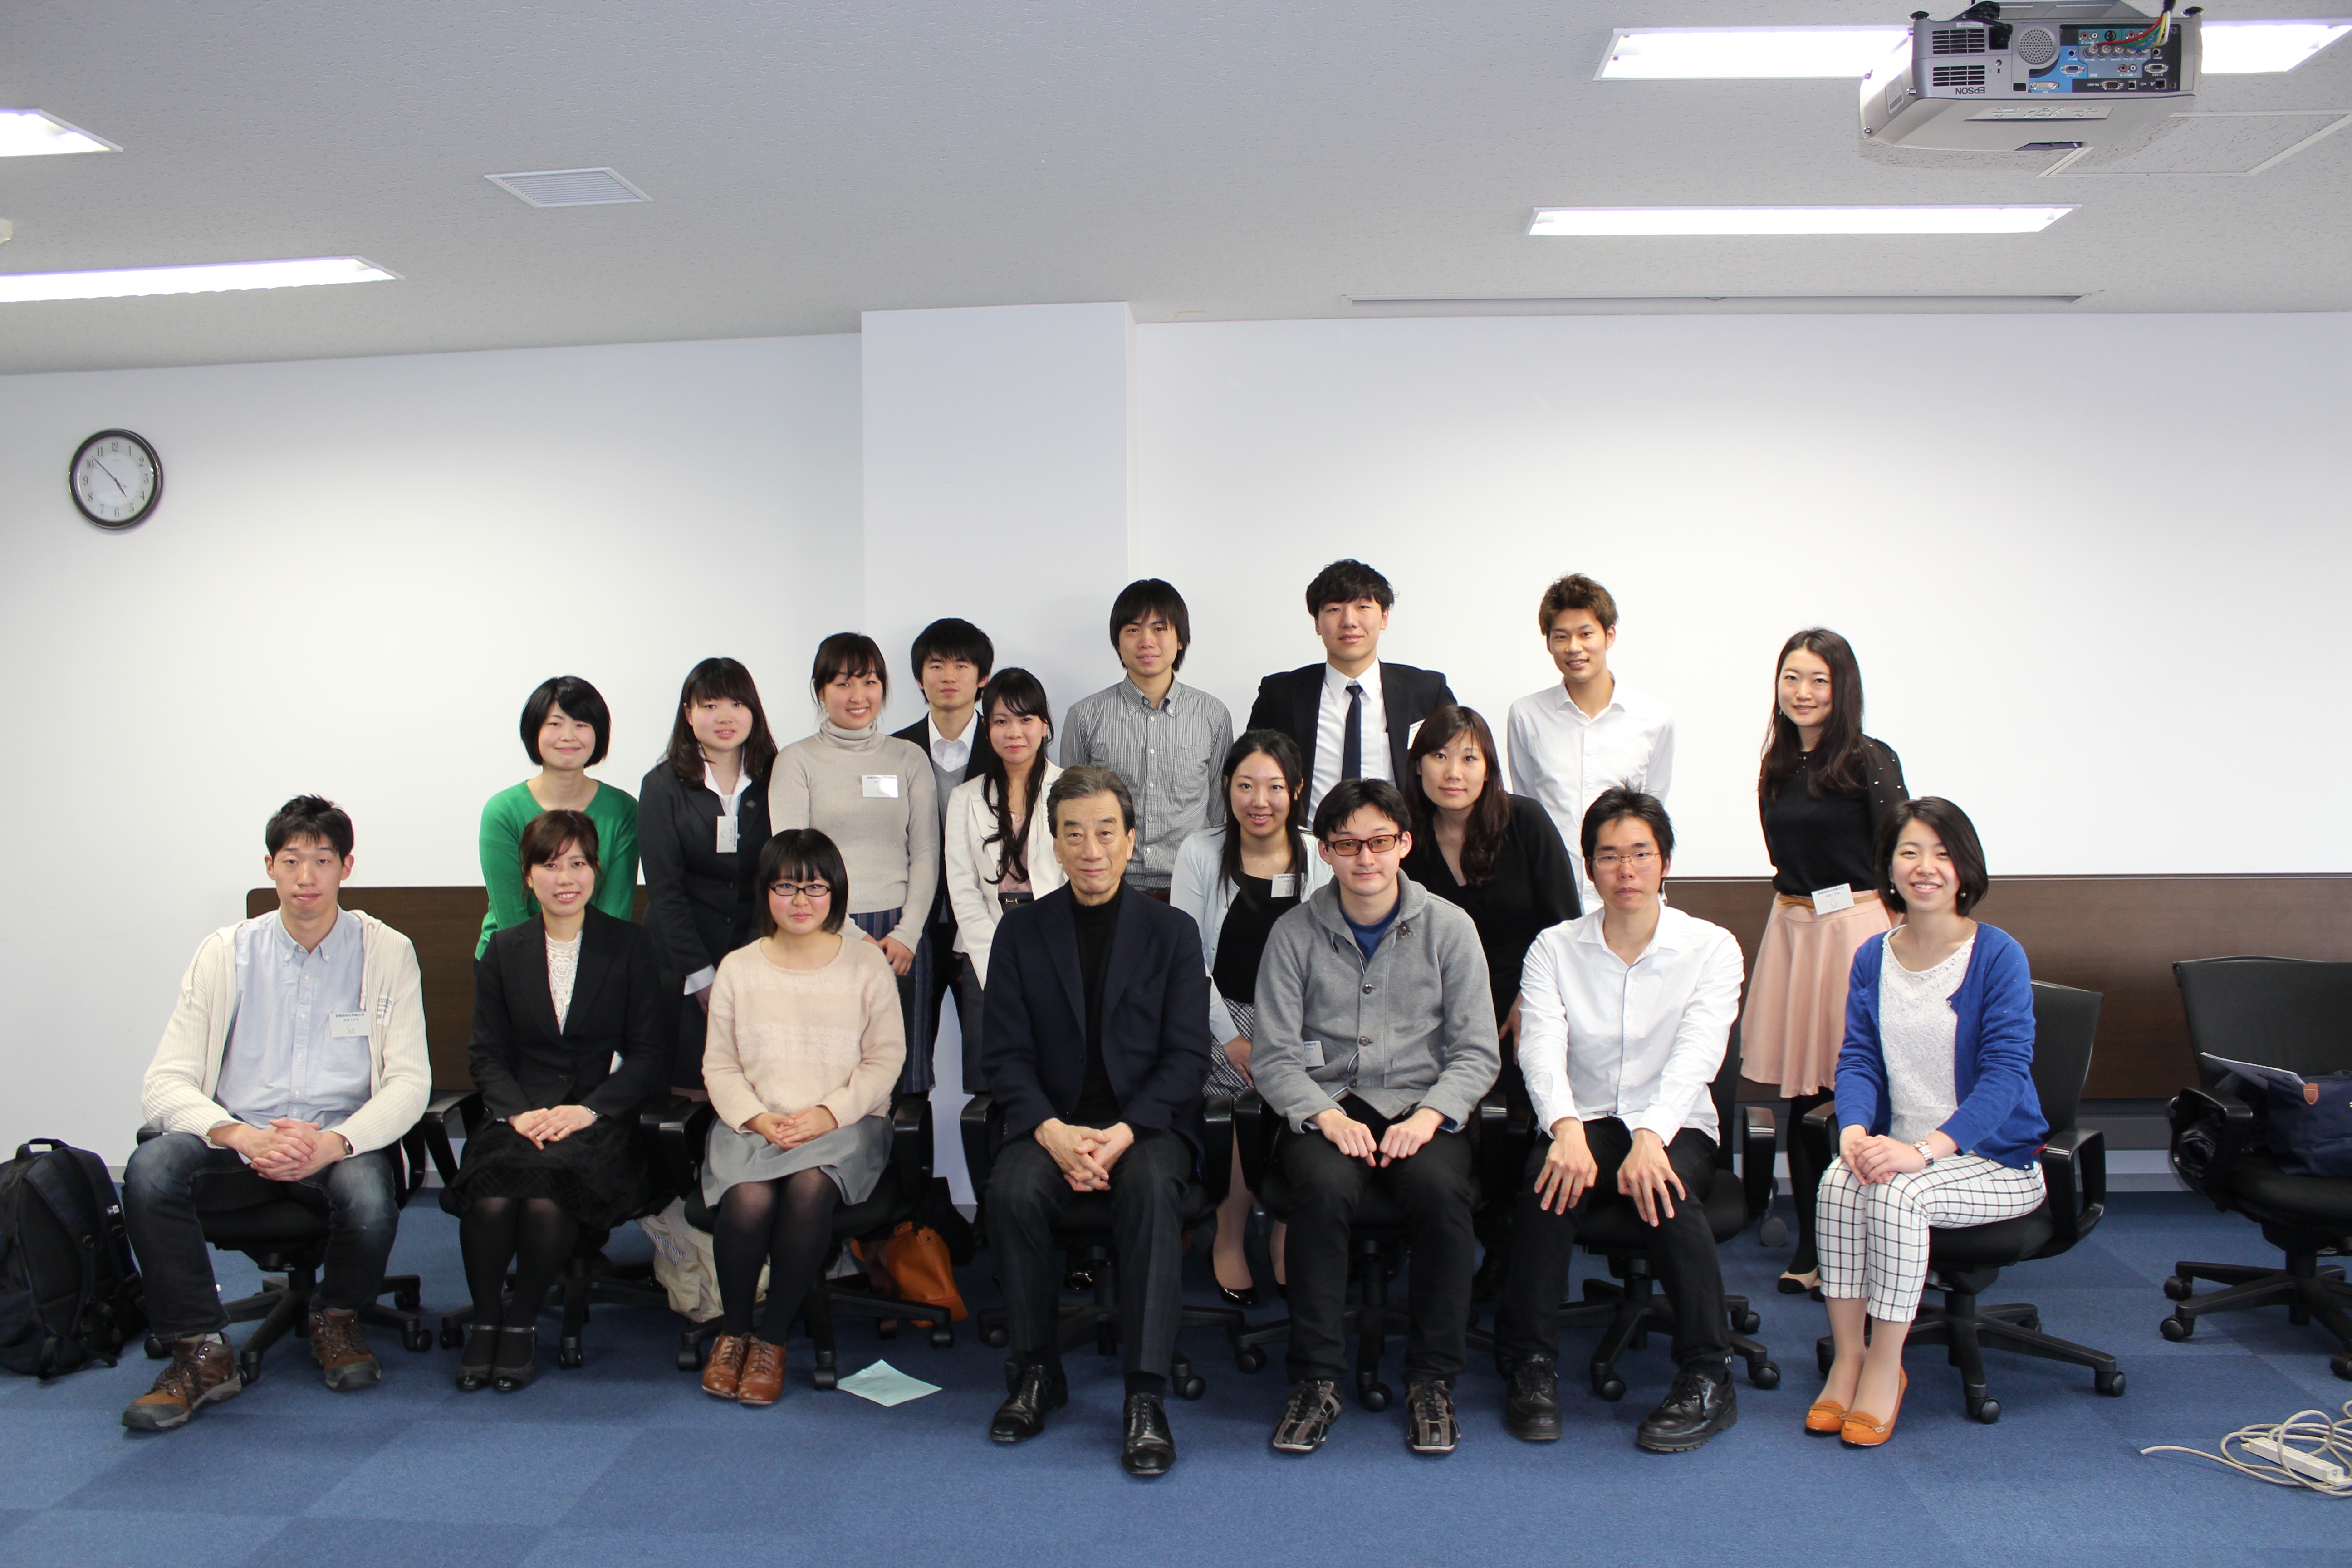 (Event Report) Healthcare Career Seminar with Dr. Kurokawa, “Building a Career in the 21st Century” (for under 25)